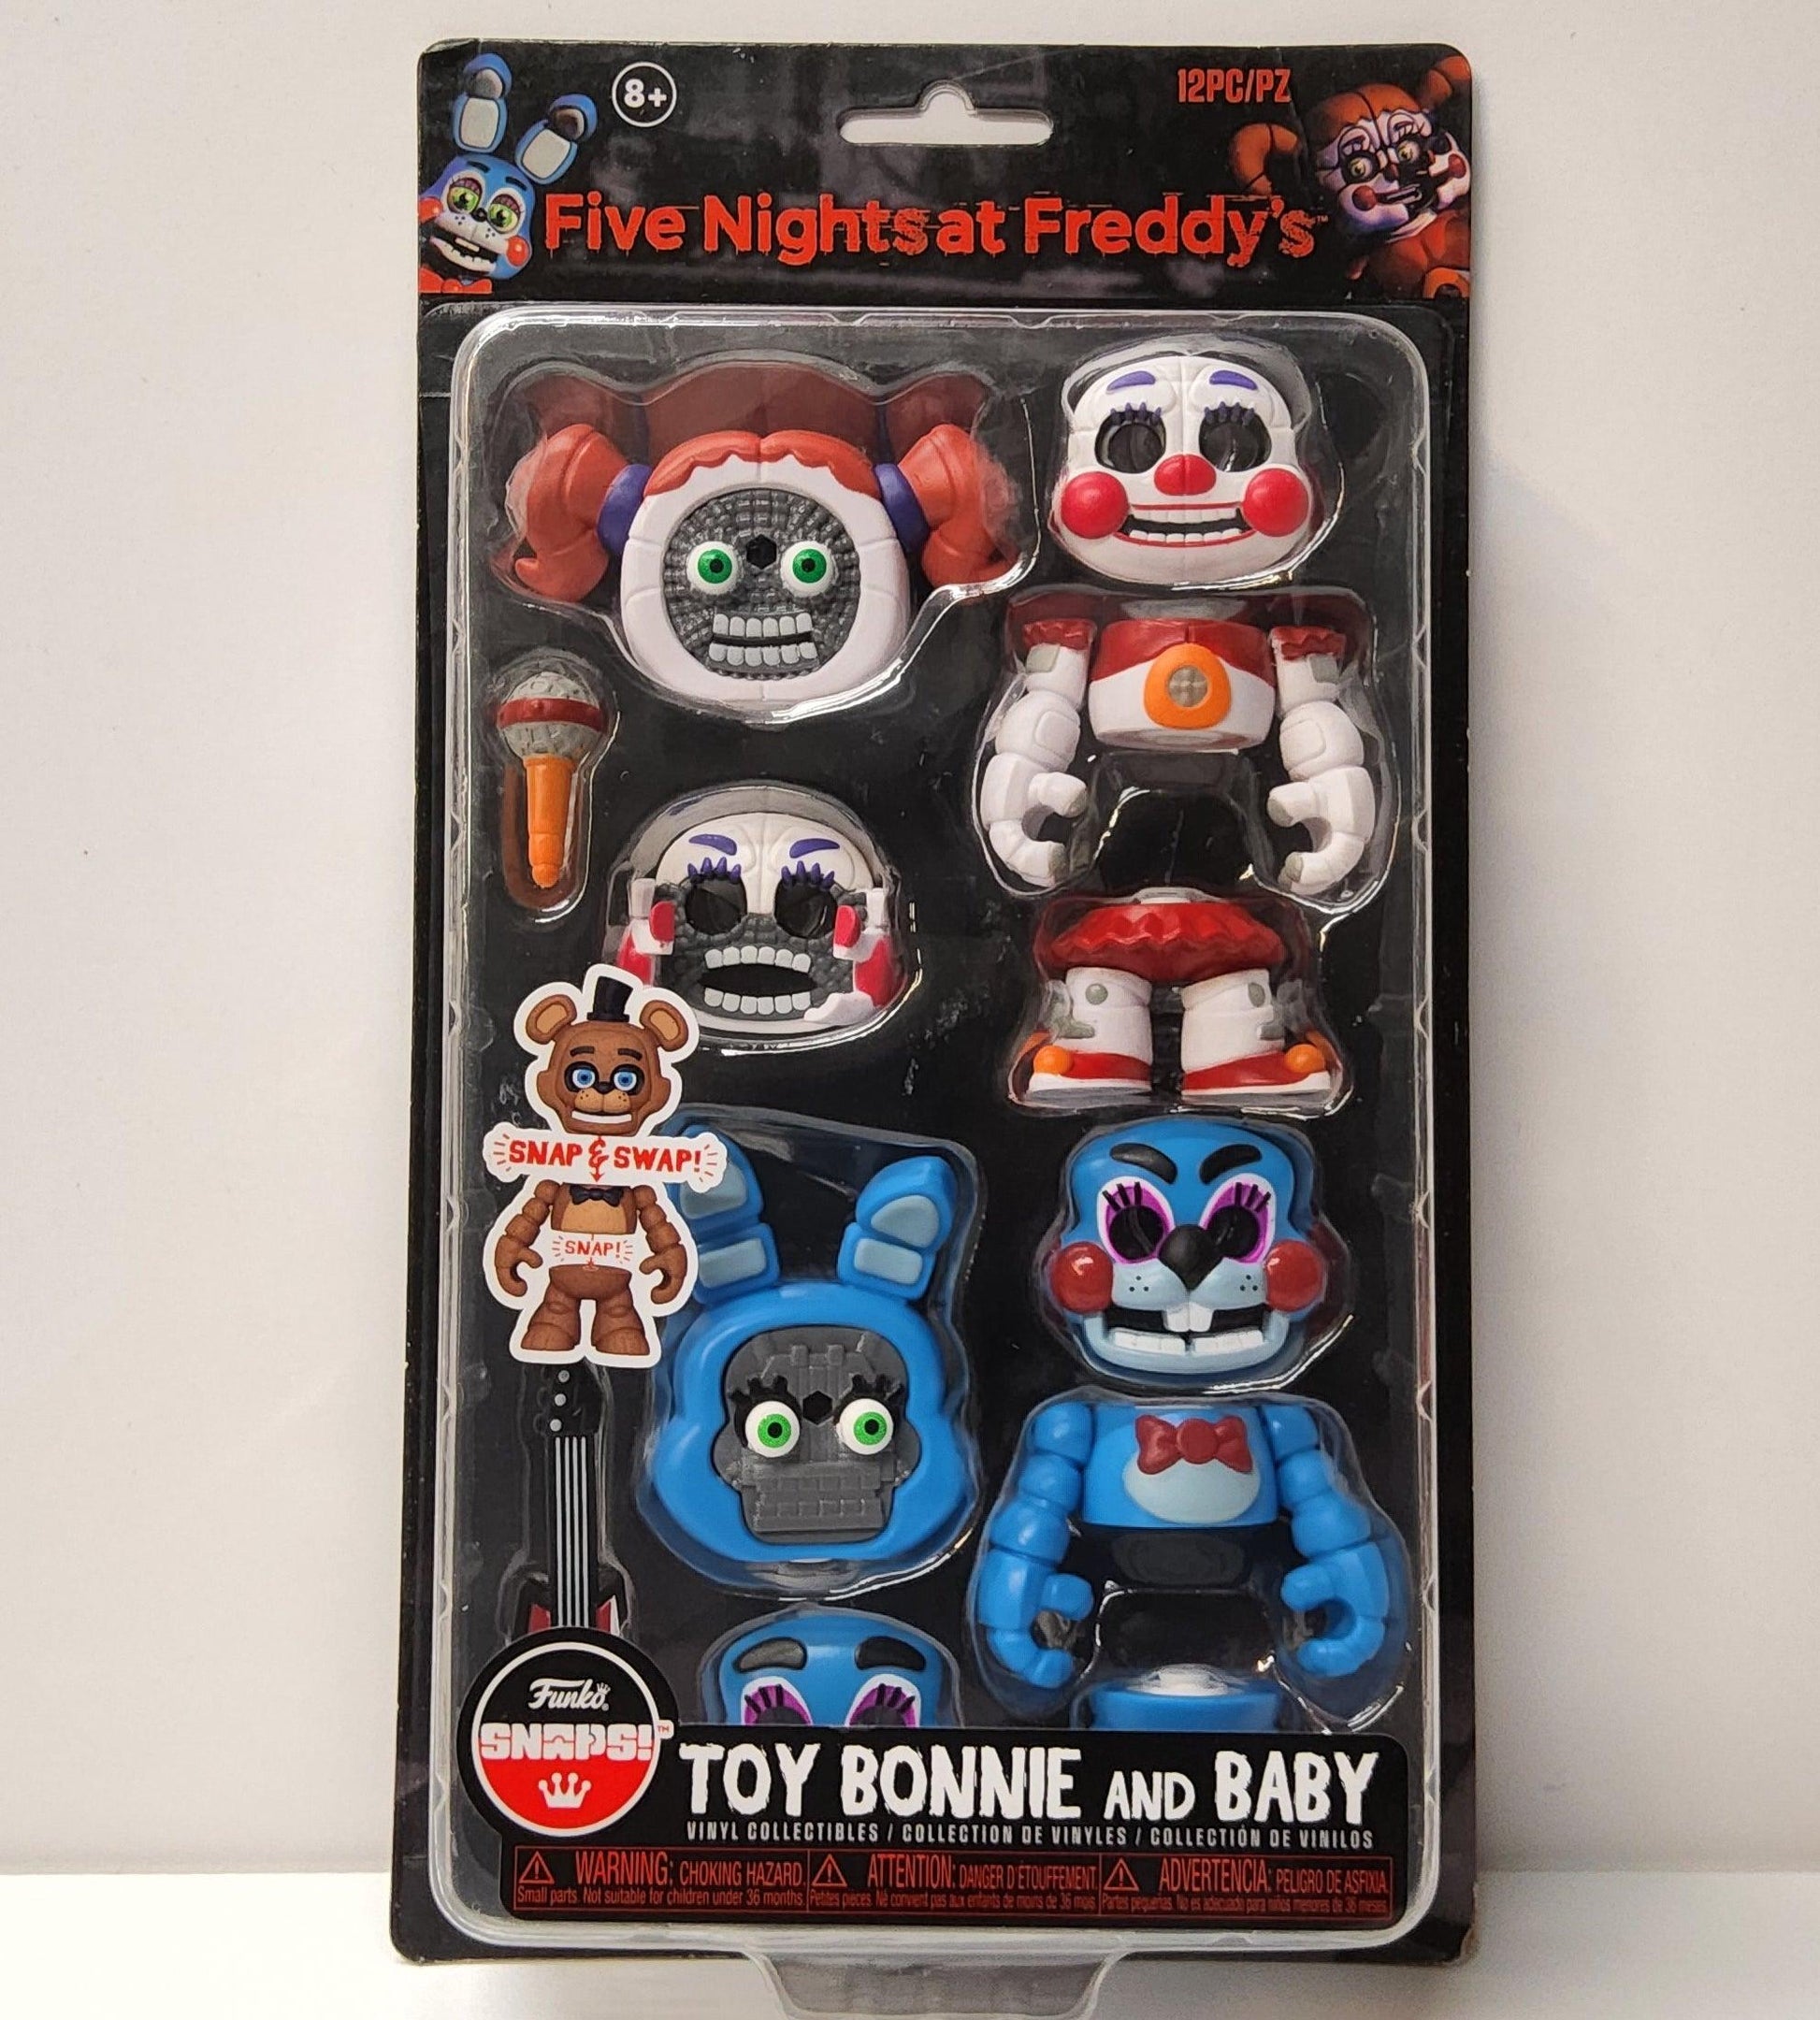 Funko Toy Bonnie and Baby FNAF Five Nights at Freddy's Funko Snaps Playset - Logan's Toy Chest